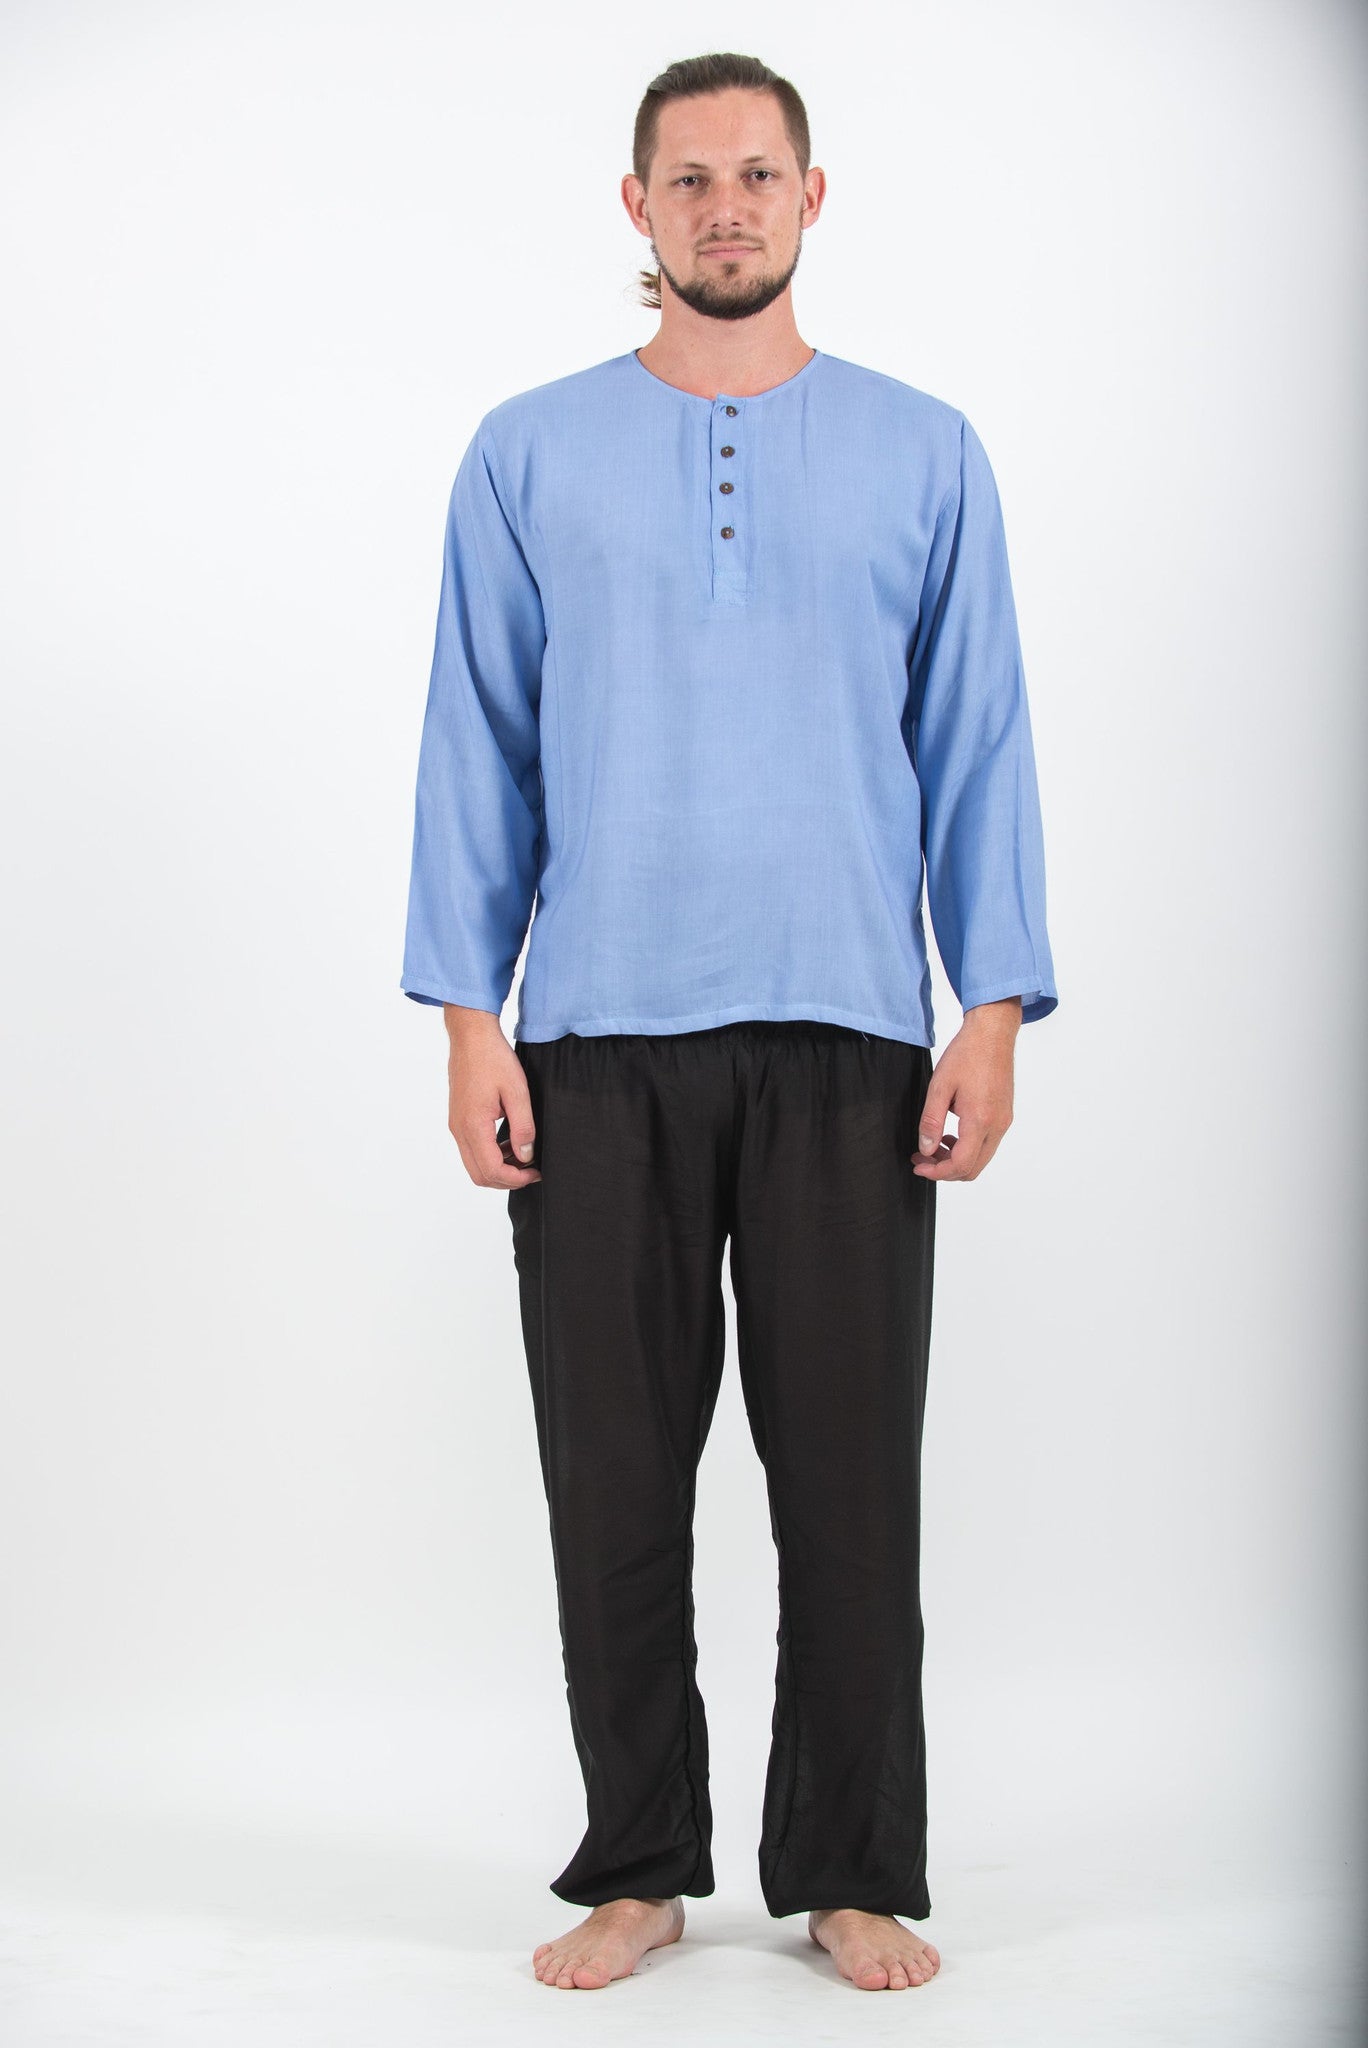 Mens Yoga Shirts No Collar with Coconut Buttons in Blue – Harem Pants